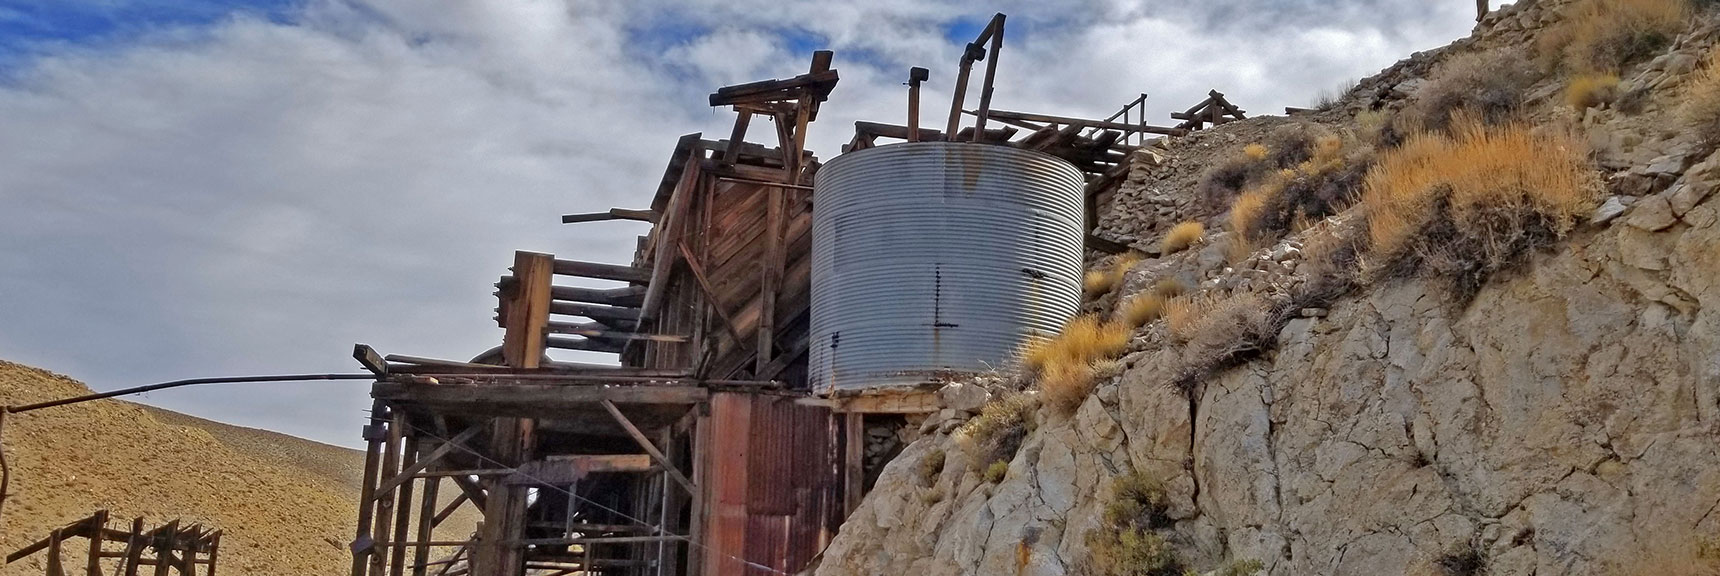 Upper Mid Section of Skidoo Stamp Mill | Skidoo Stamp Mill, Panamint Mountains, Death Valley National Park, CA